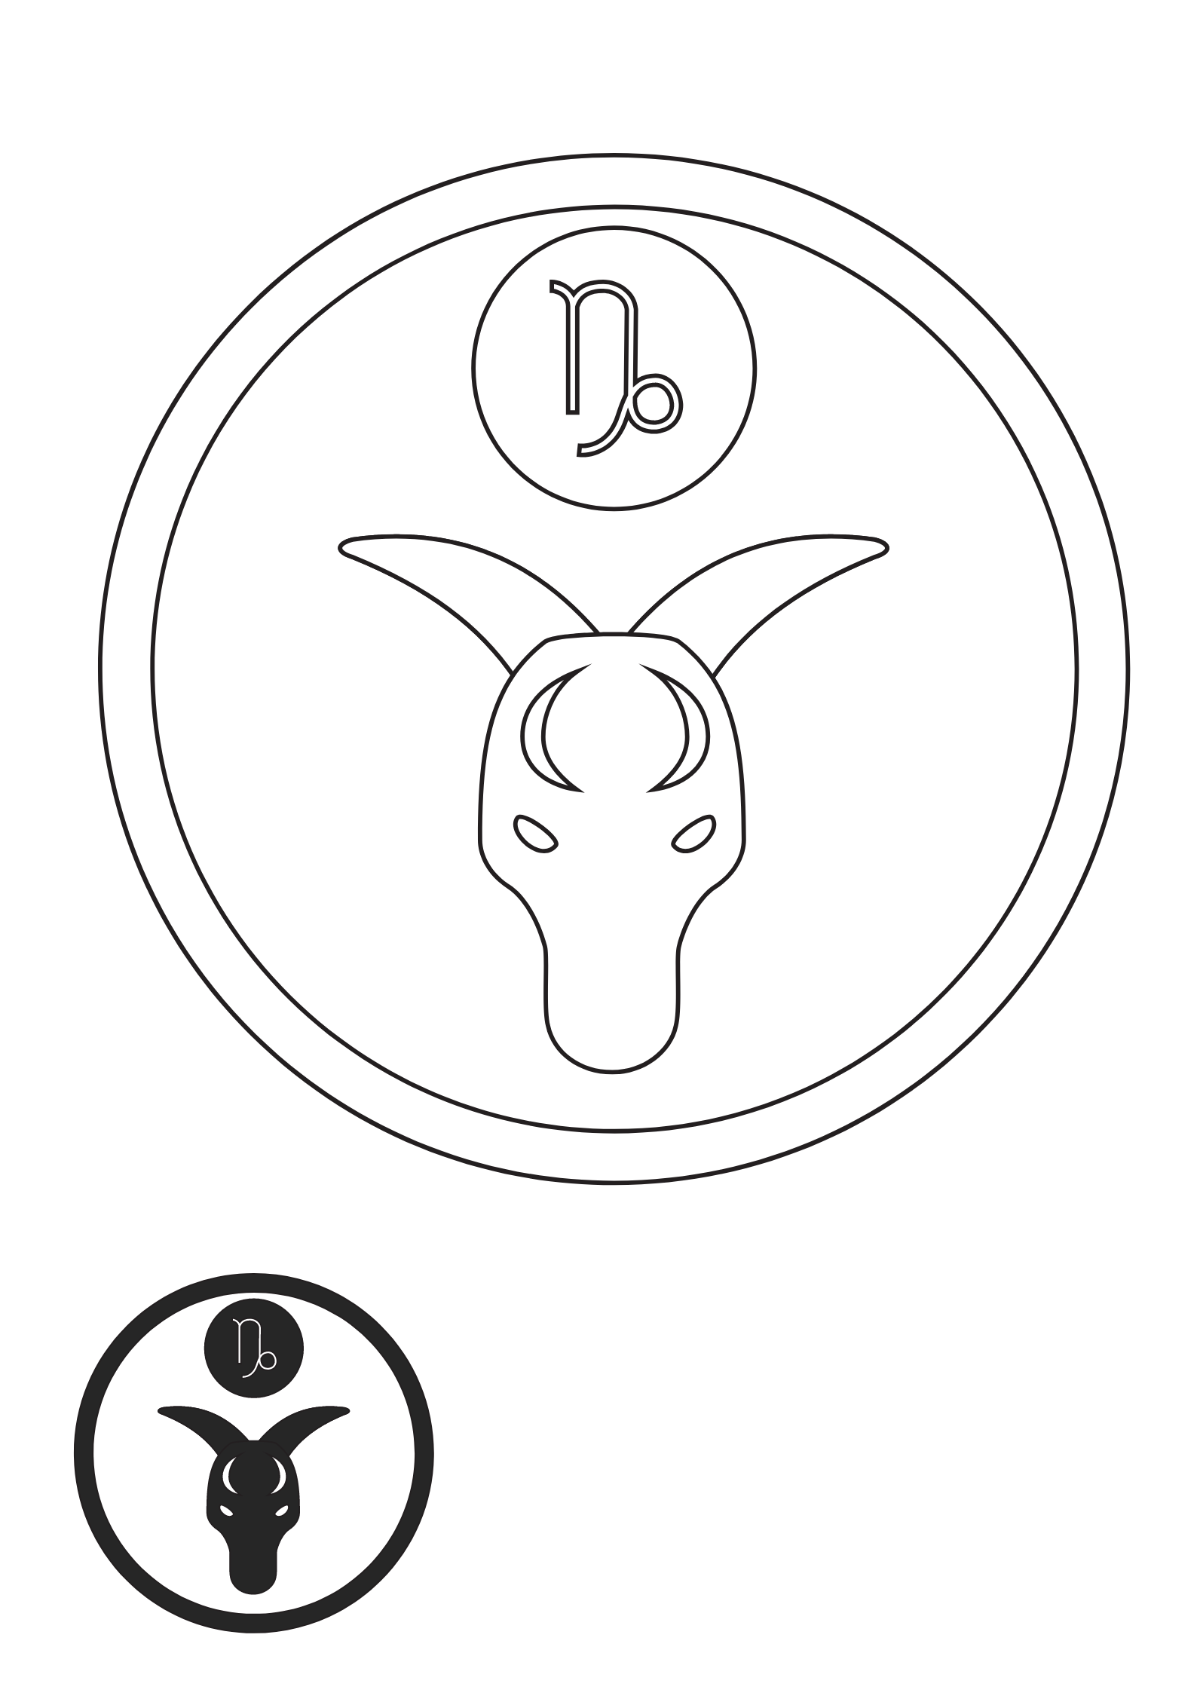 Black And White Capricorn coloring page Template